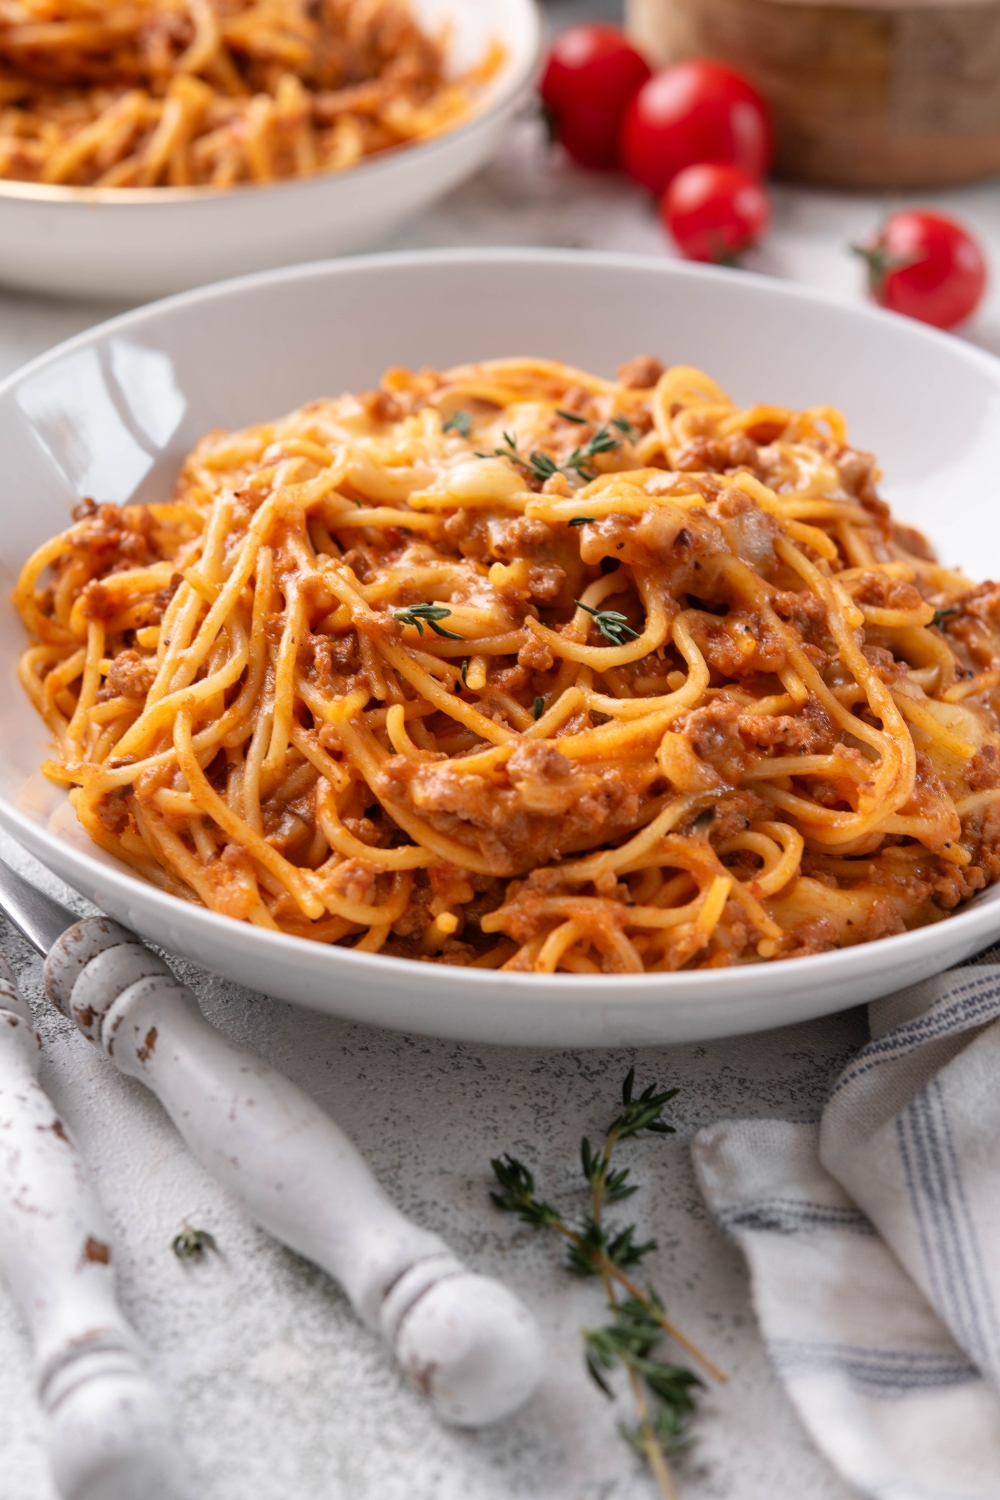 A bowl of spaghetti in a red creamy sauce with melted cheese and ground beef.